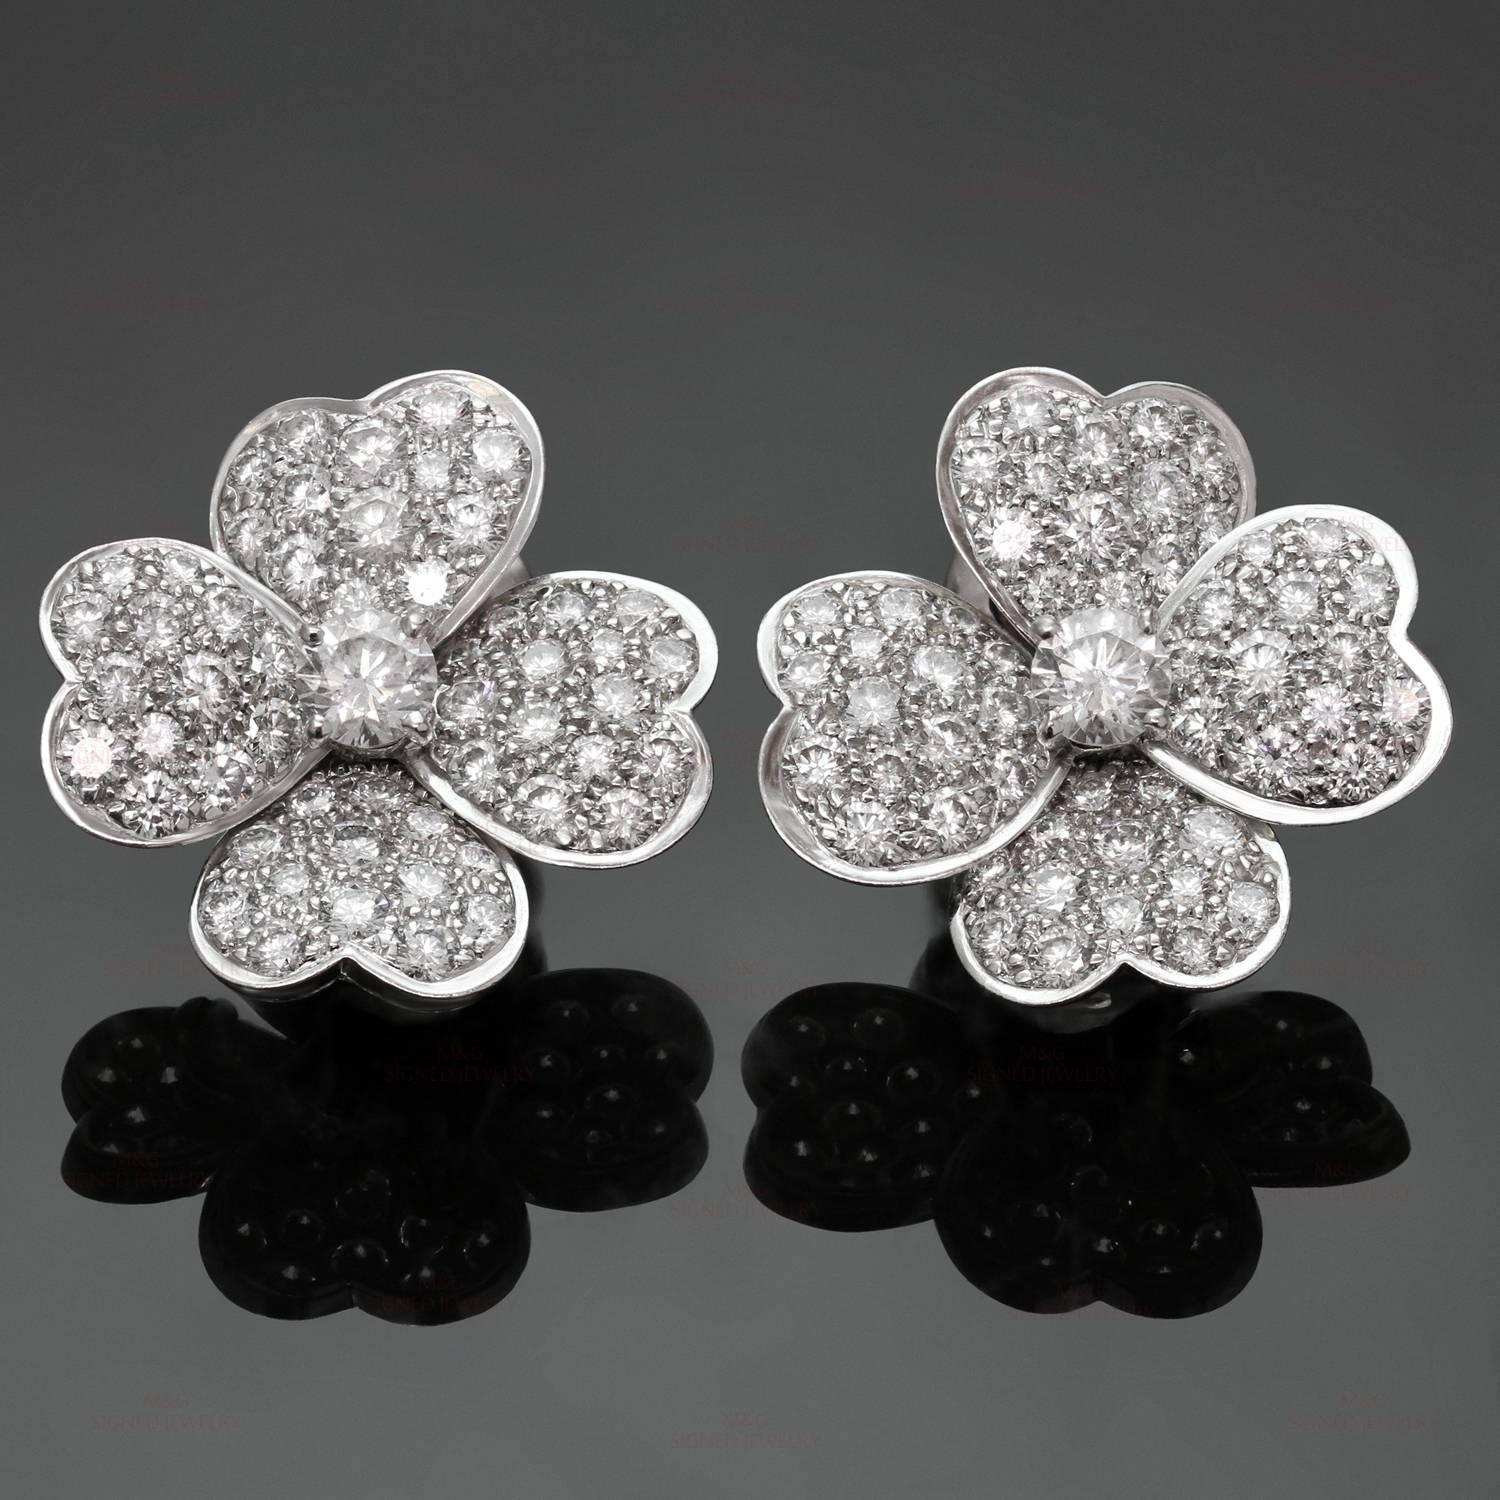 These exquisite medium model clip-on earrings from the Cosmos collection by Van Cleef & Arpels feature a delicate flower design crafted in 18k white gold and set with 106 brilliant-cut D-F quality & IF to VVS color diamonds of an estimated 3.15